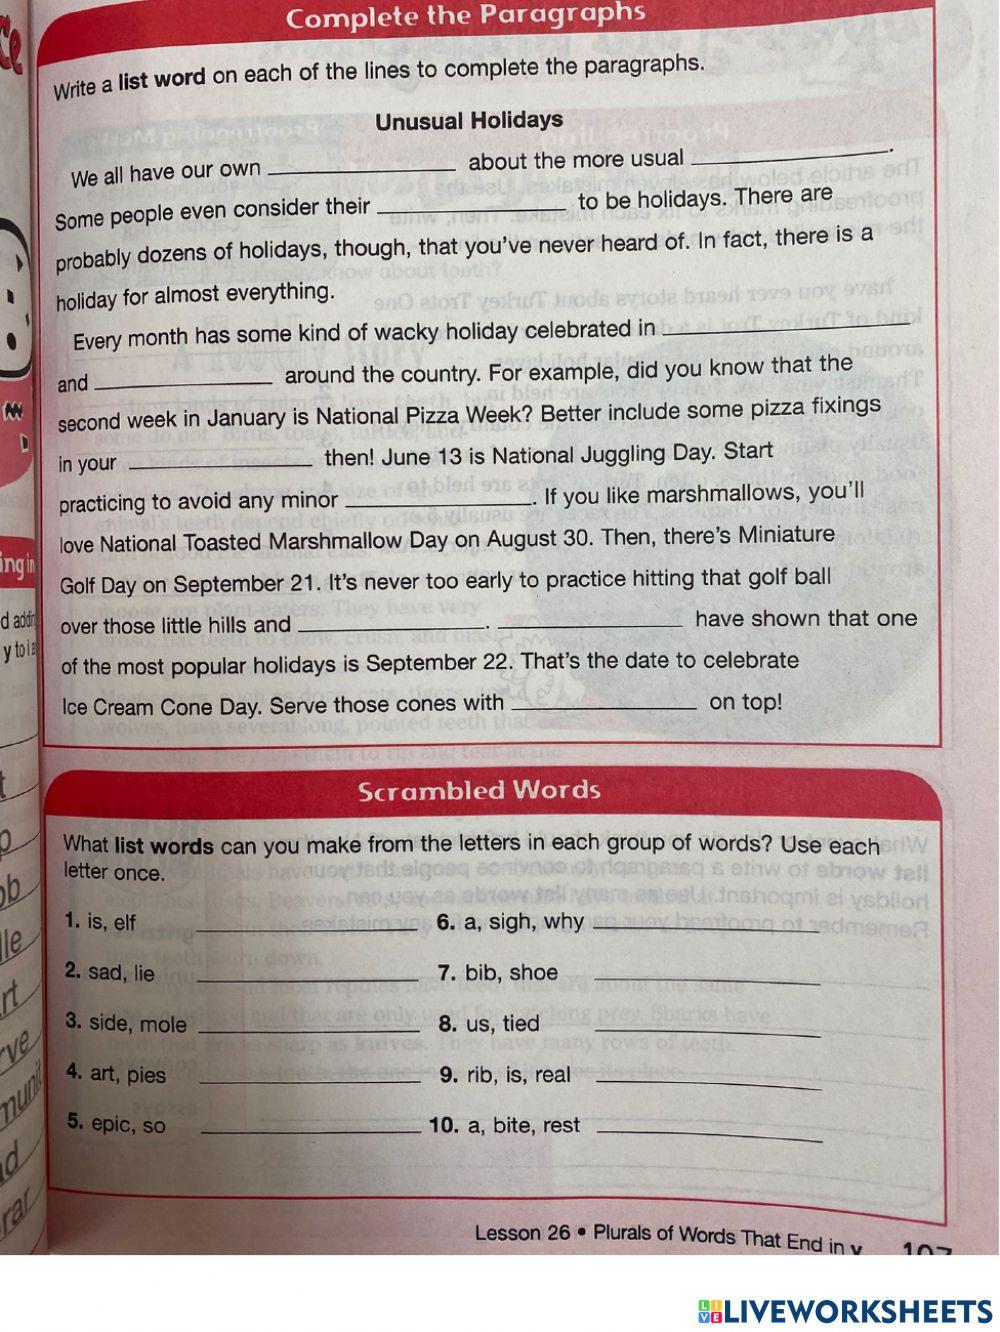 Spelling Workout Pg. 107